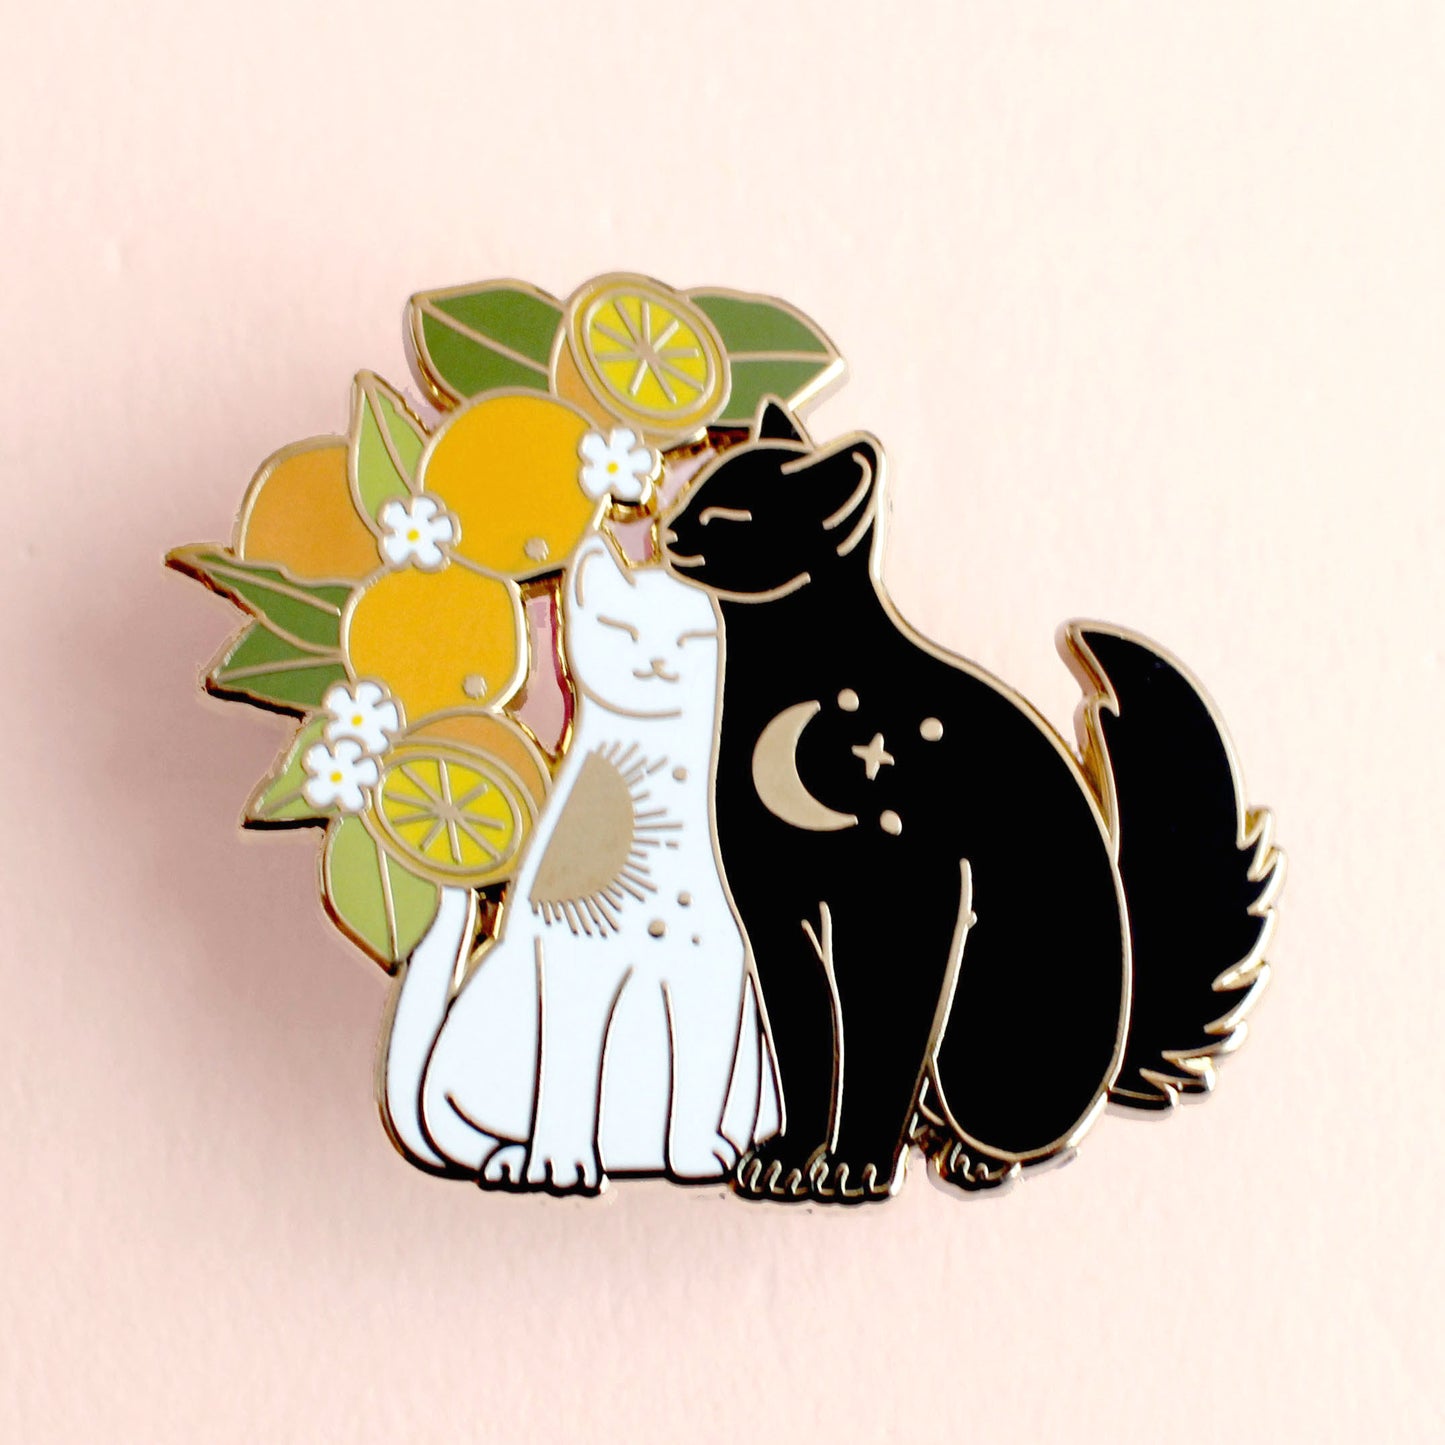 Snuggling cats enamel pin with oranges